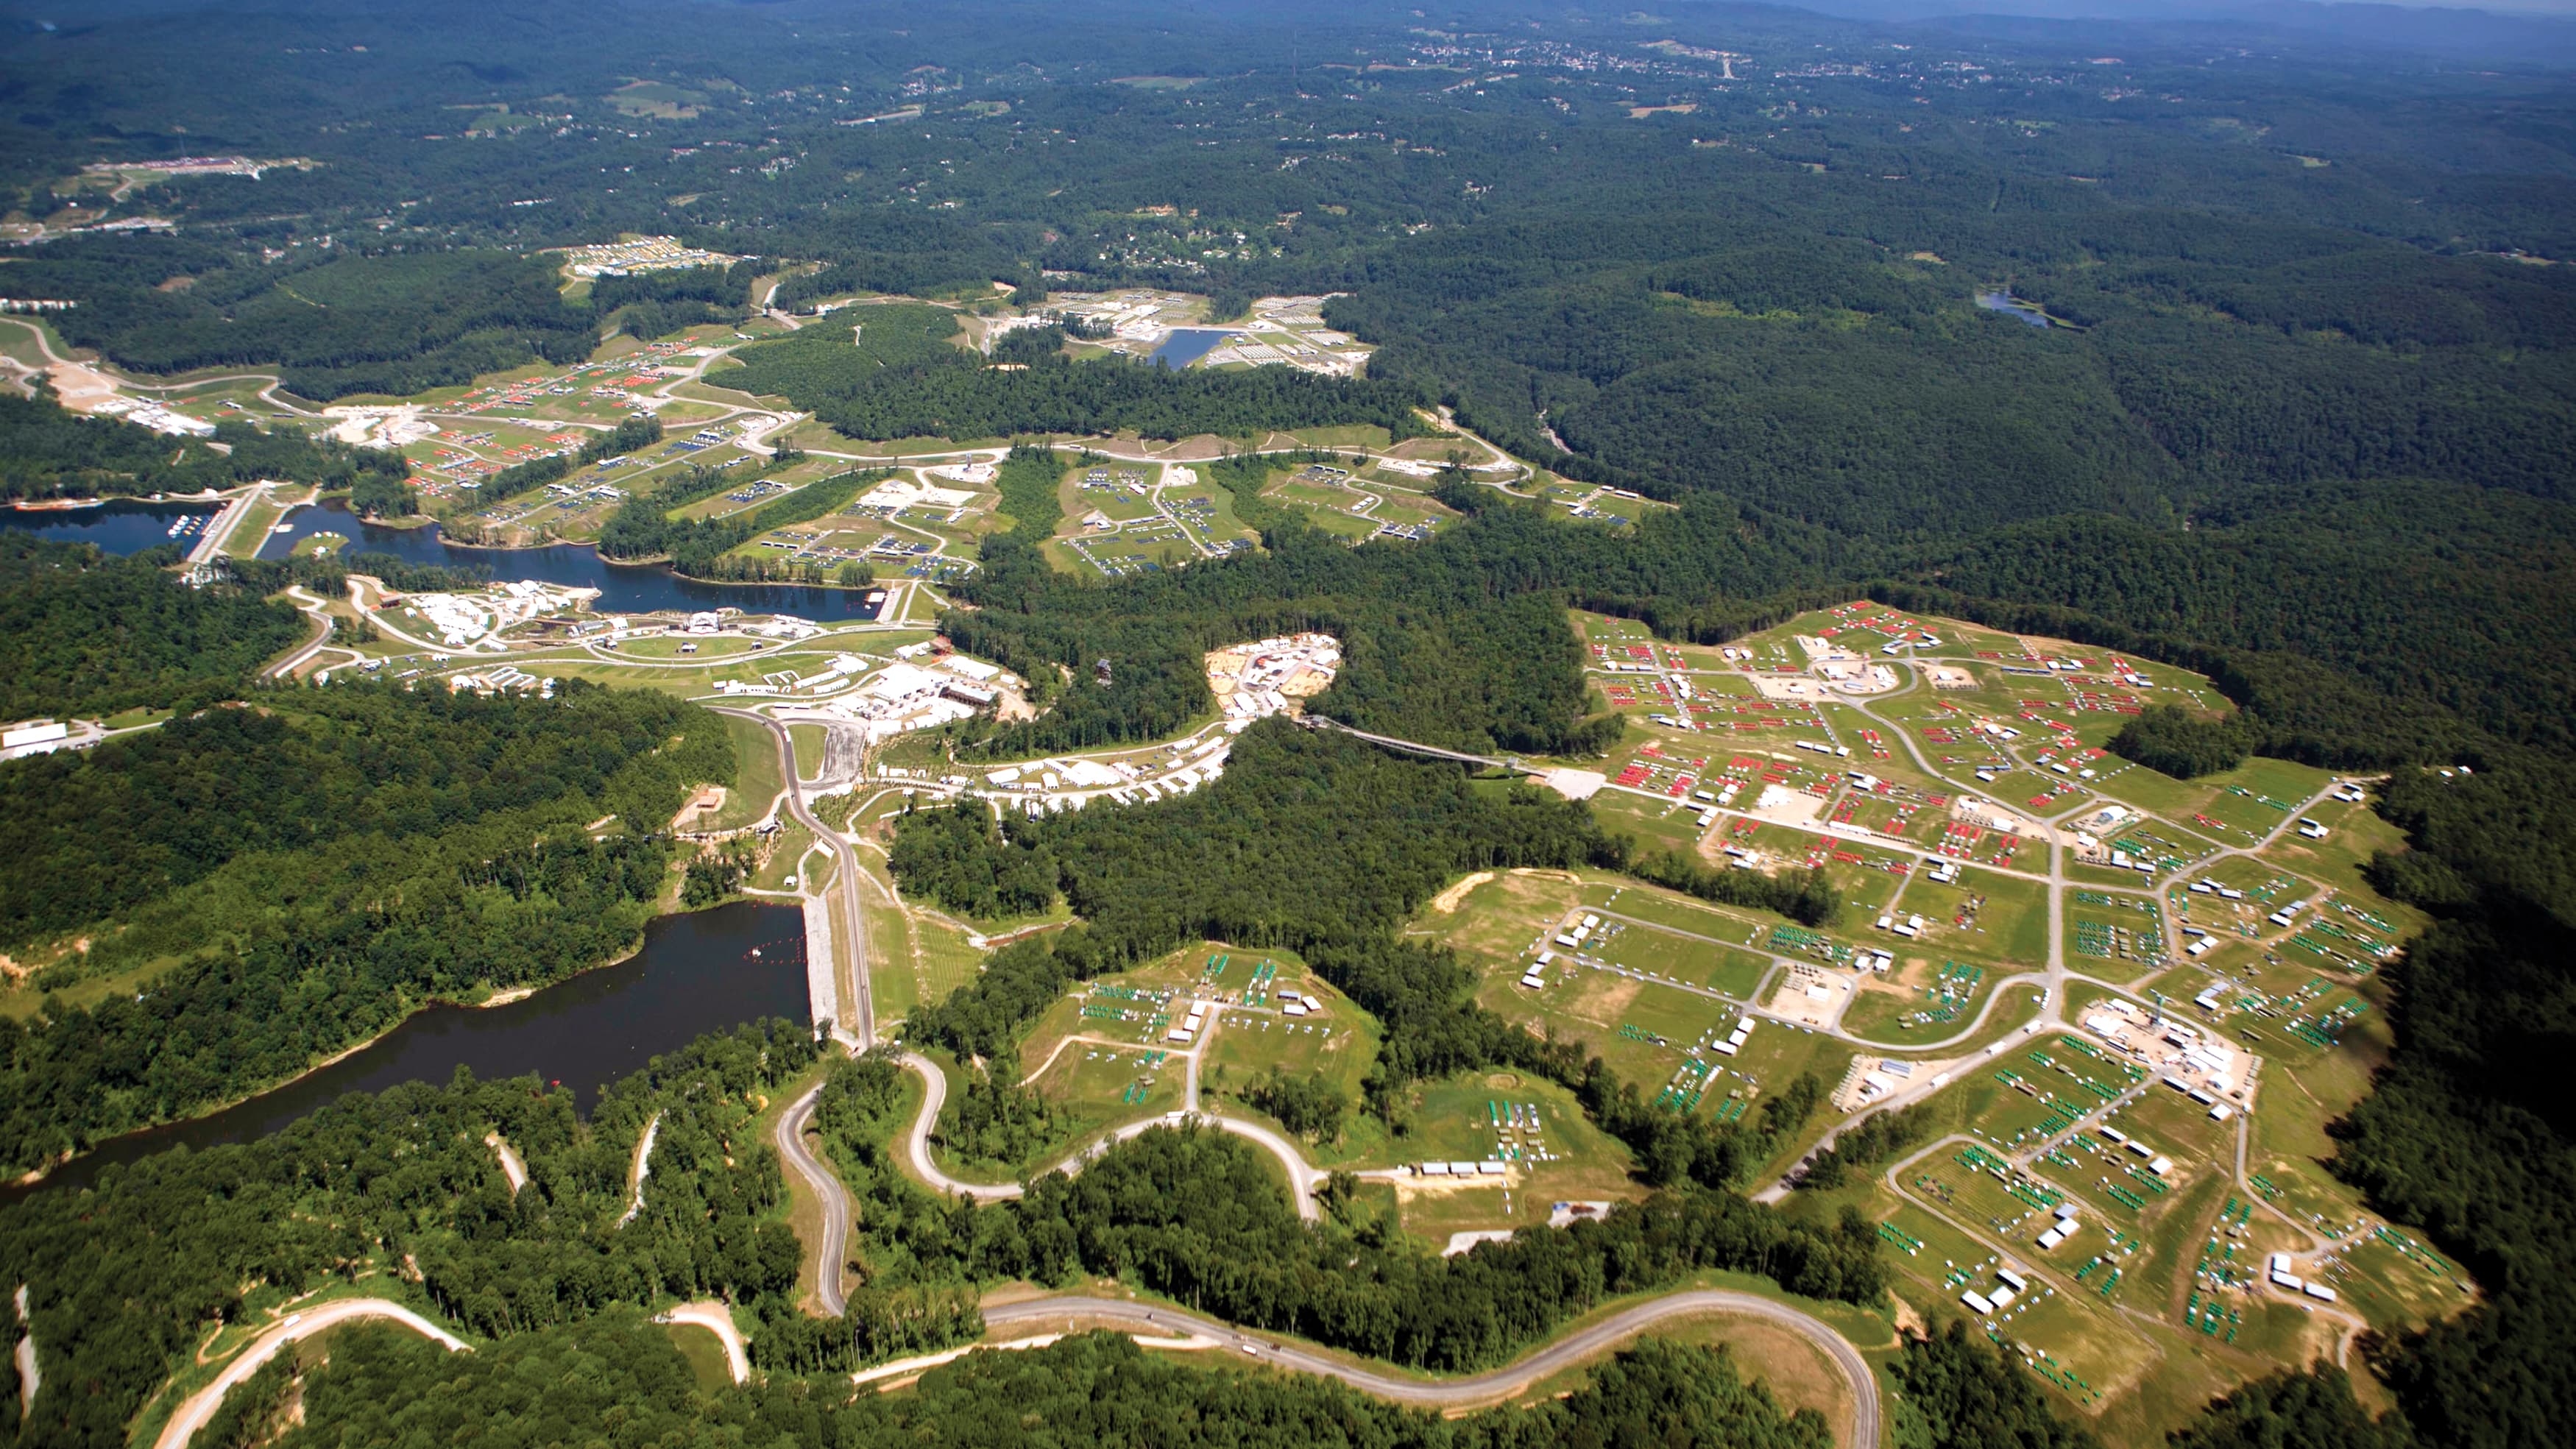 Overhead view of the whole Summit Bechtel Reserve Boy Scouts of America Jamboree site in West Virgina